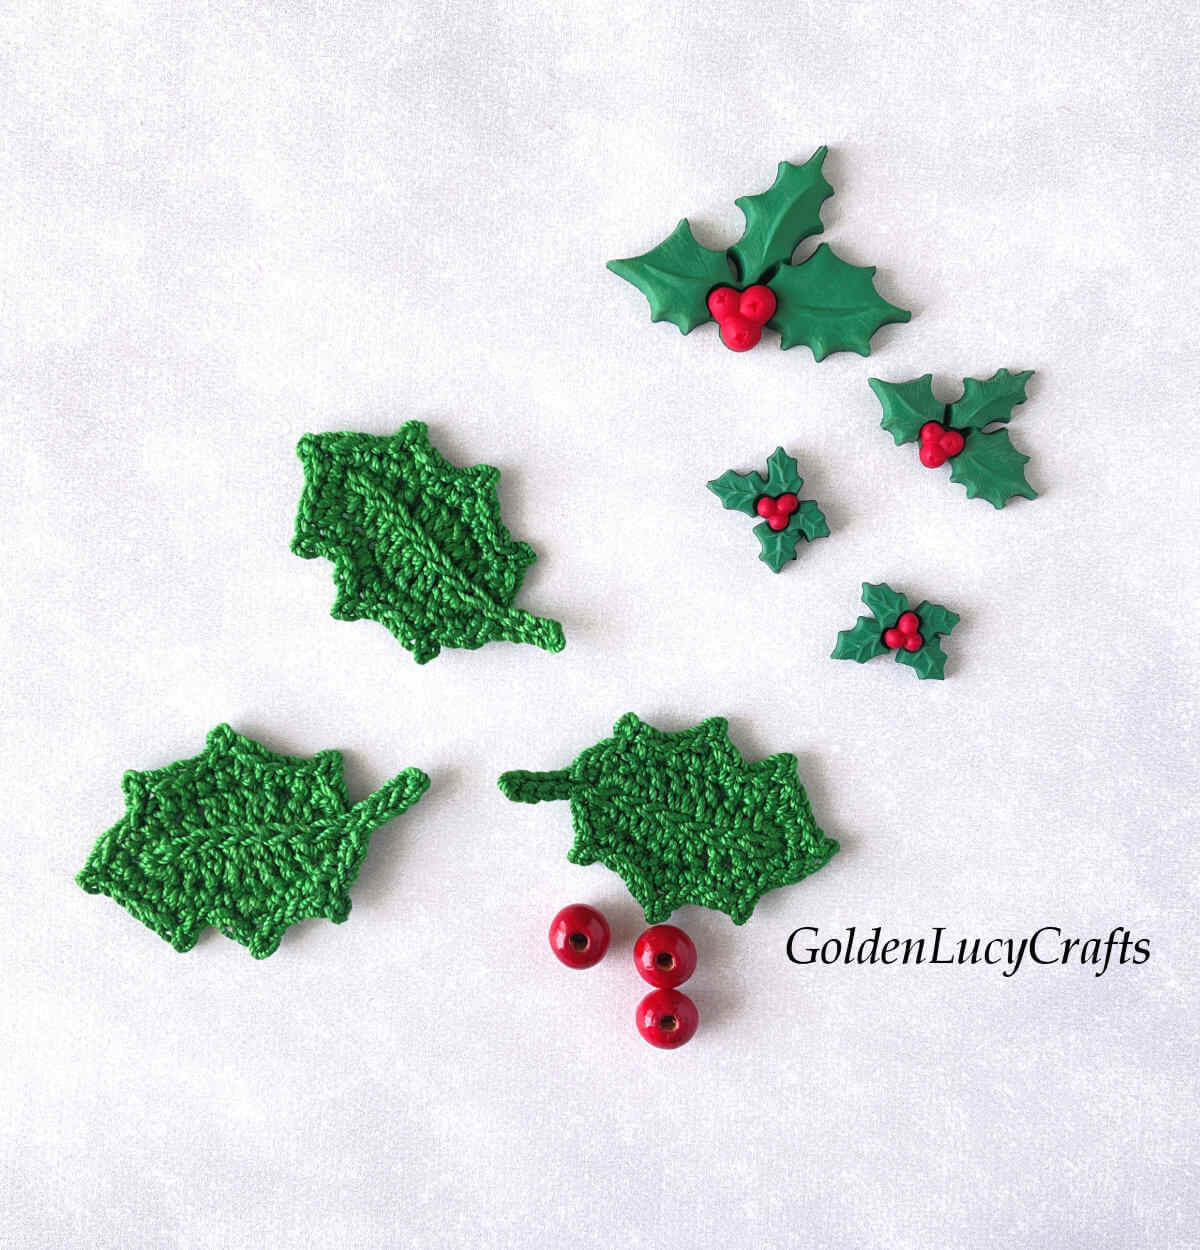 Crochet holly leaf appliques, red beads, decorative holly berry buttons.